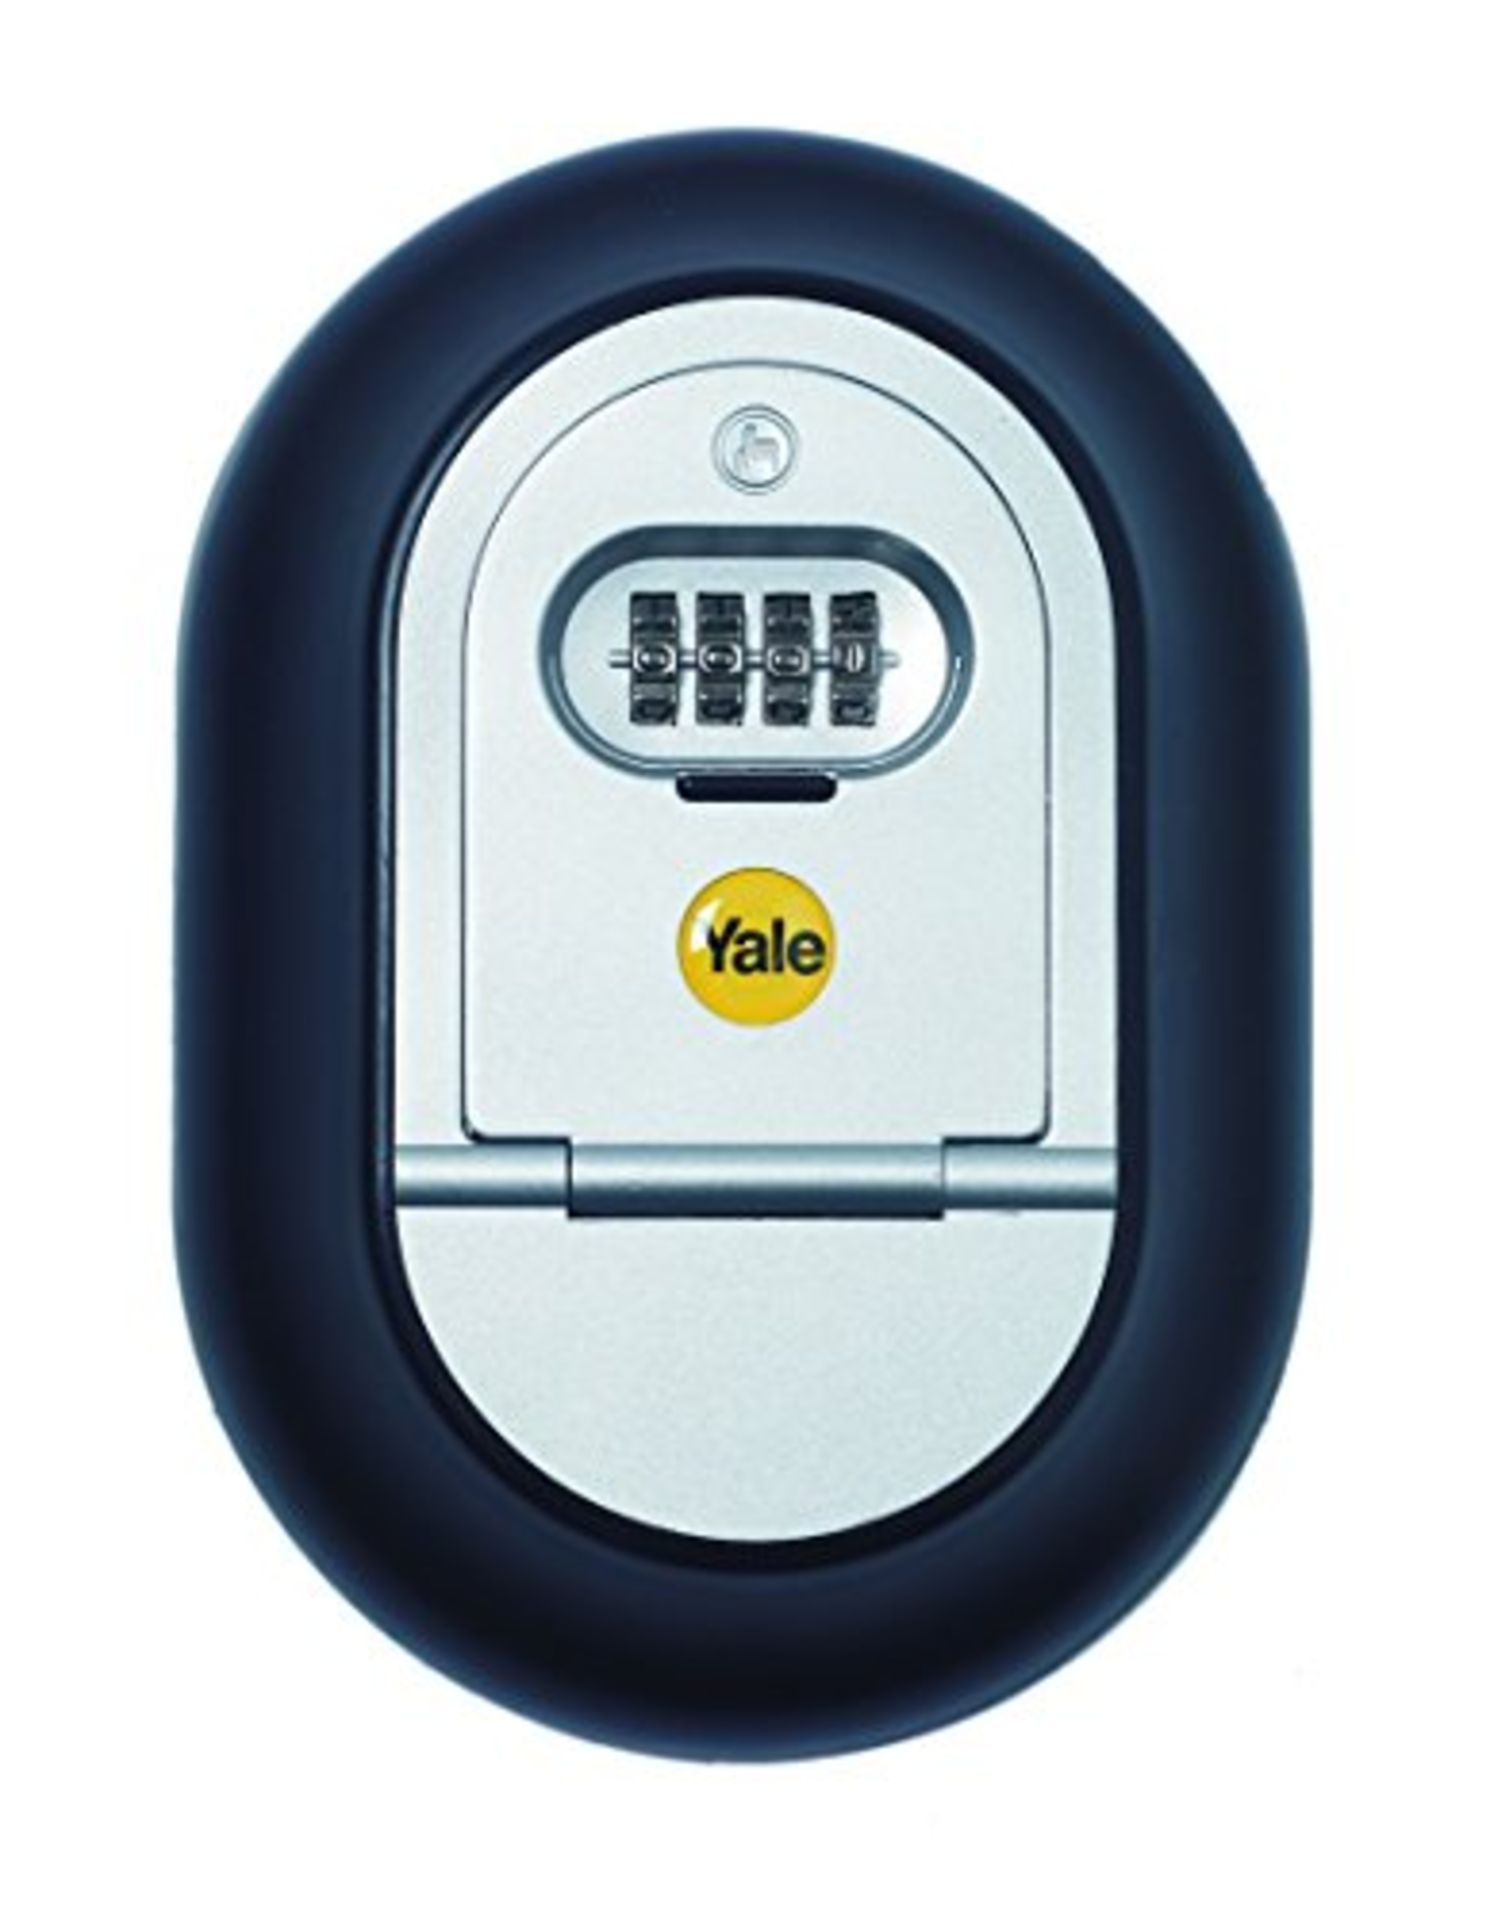 1 x Yale Y500/187/1 Combination Key Safe Box, 4-Digit Combination, Wall Mounted, Black/Silver Finish